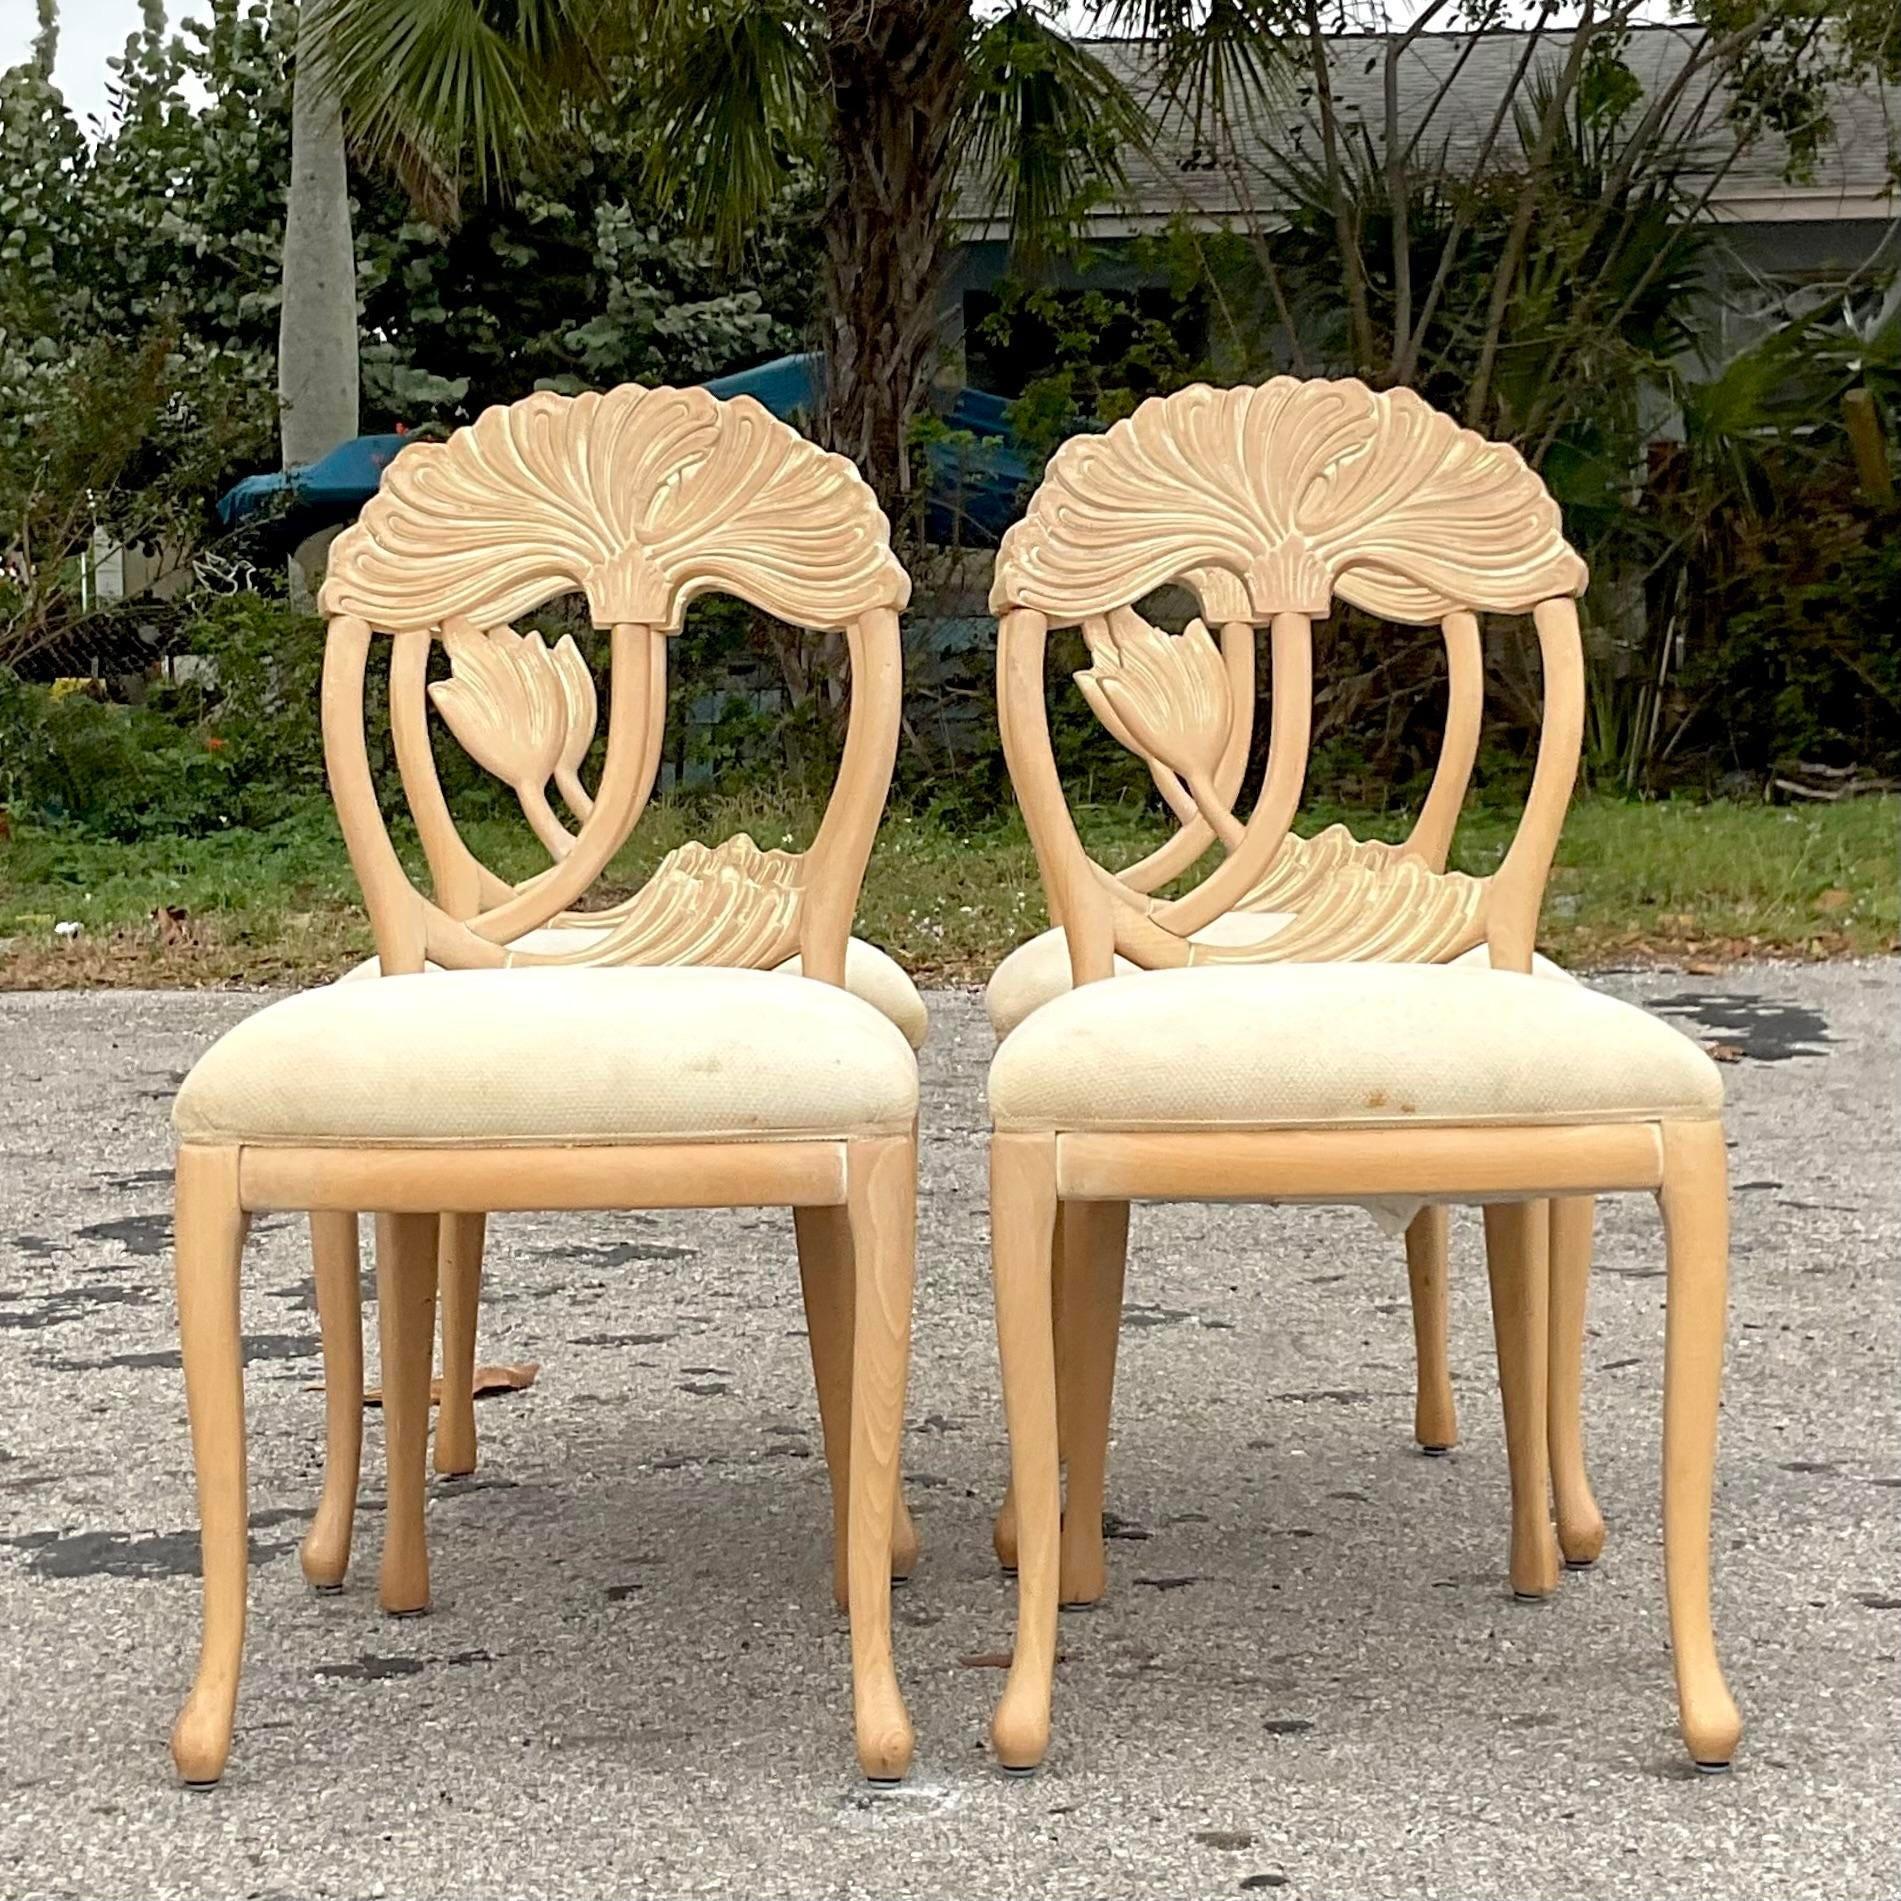 Late 20th Century Vintage Coastal Andre Originals Carved Lily Dining Chairs - Set of 4 For Sale